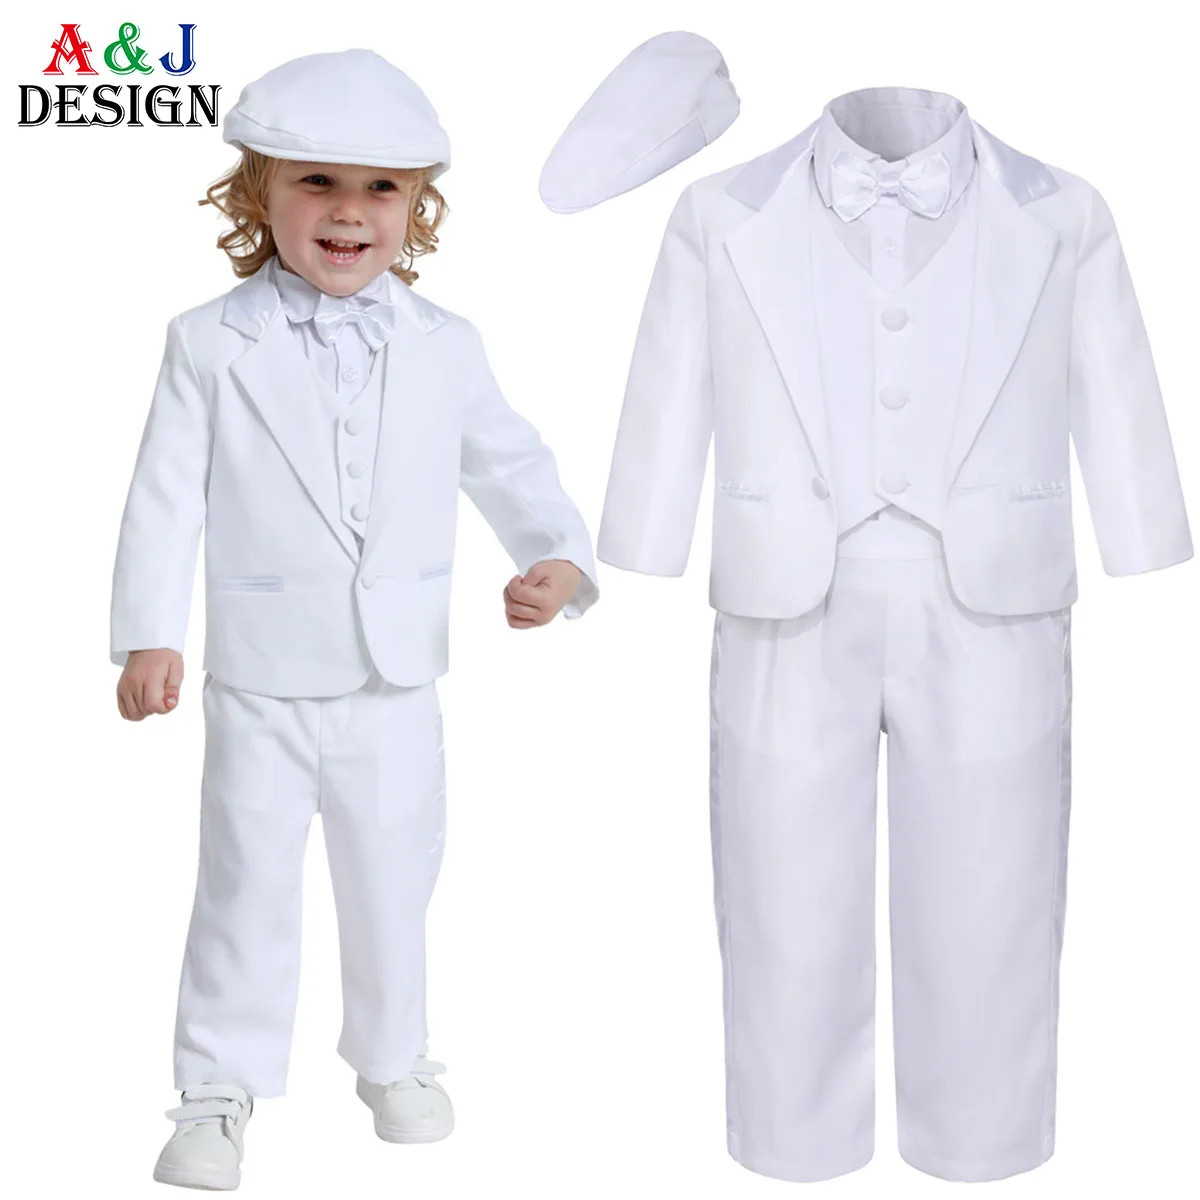 Baby Boys Baptism Christening Suit Infant Wedding Birthday Outfit Toddler Party Ceremony Blessing Photography Tuxedo 4 pcs